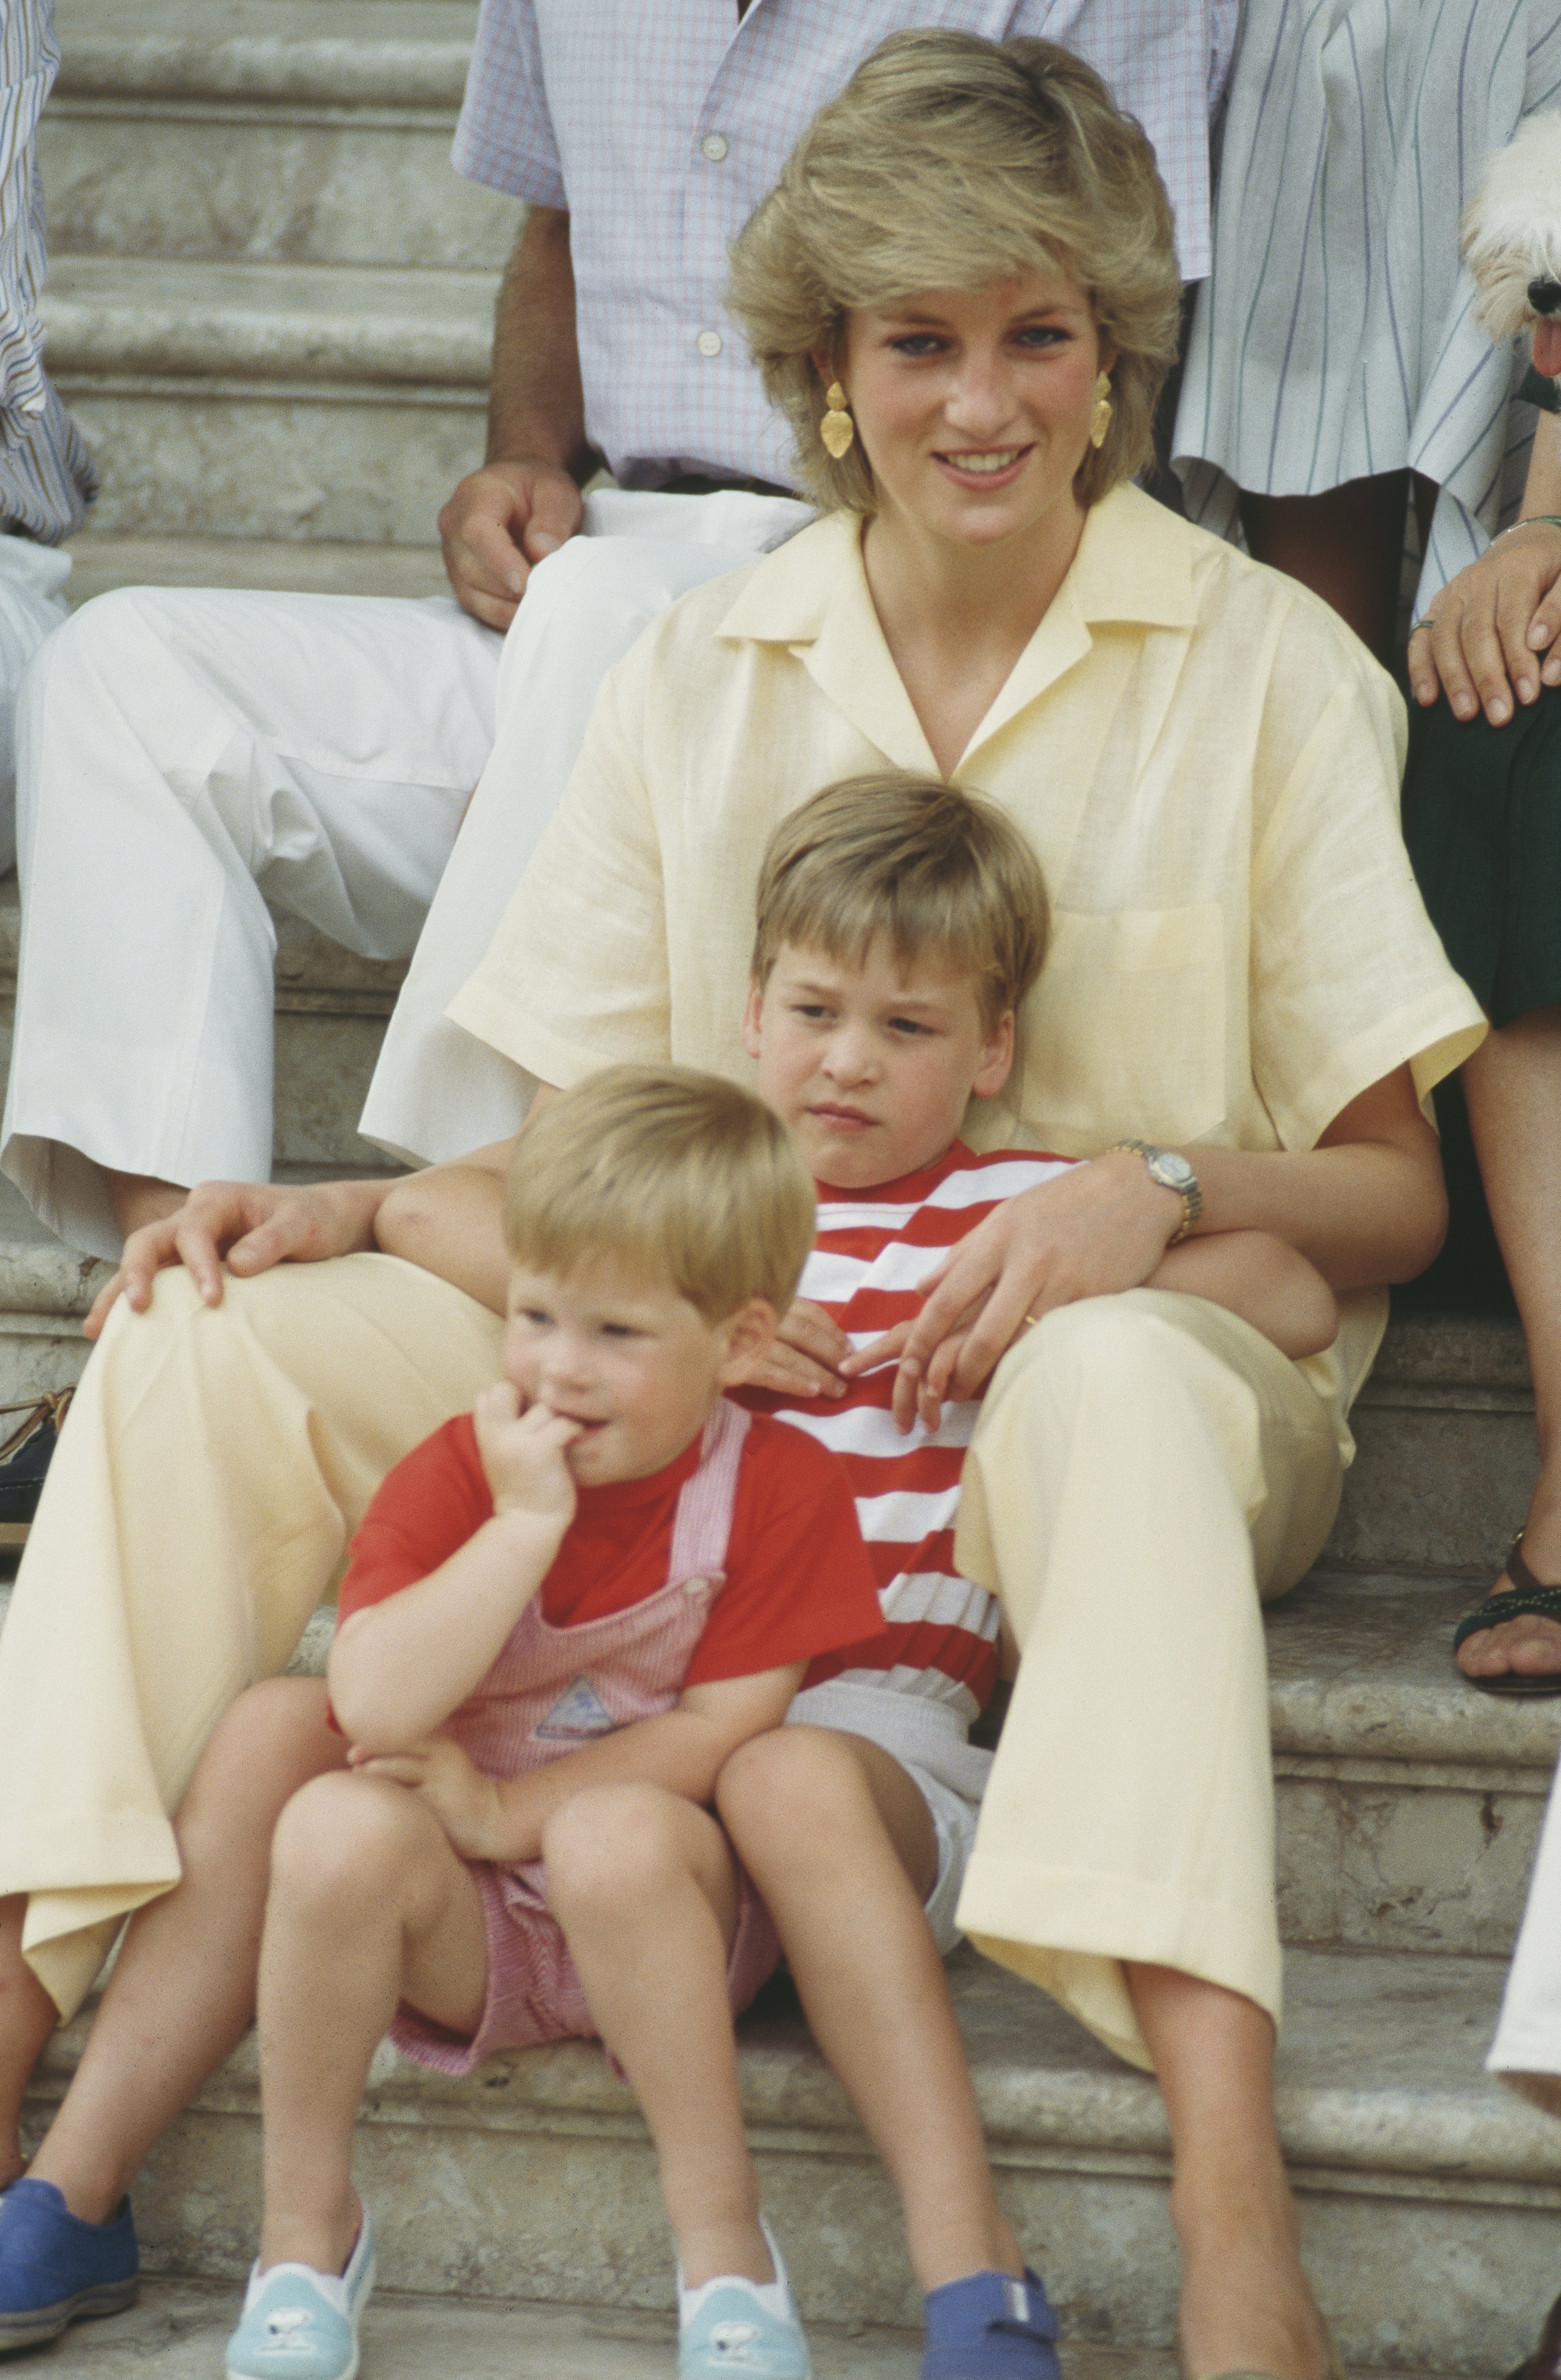 Princess Diana with her sons Princes William and Harry during a holiday with the Spanish royal family in Palma de Mallorca, Spain, in August 1987. | Source: Terry Fincher/Princess Diana Archive/Getty Images